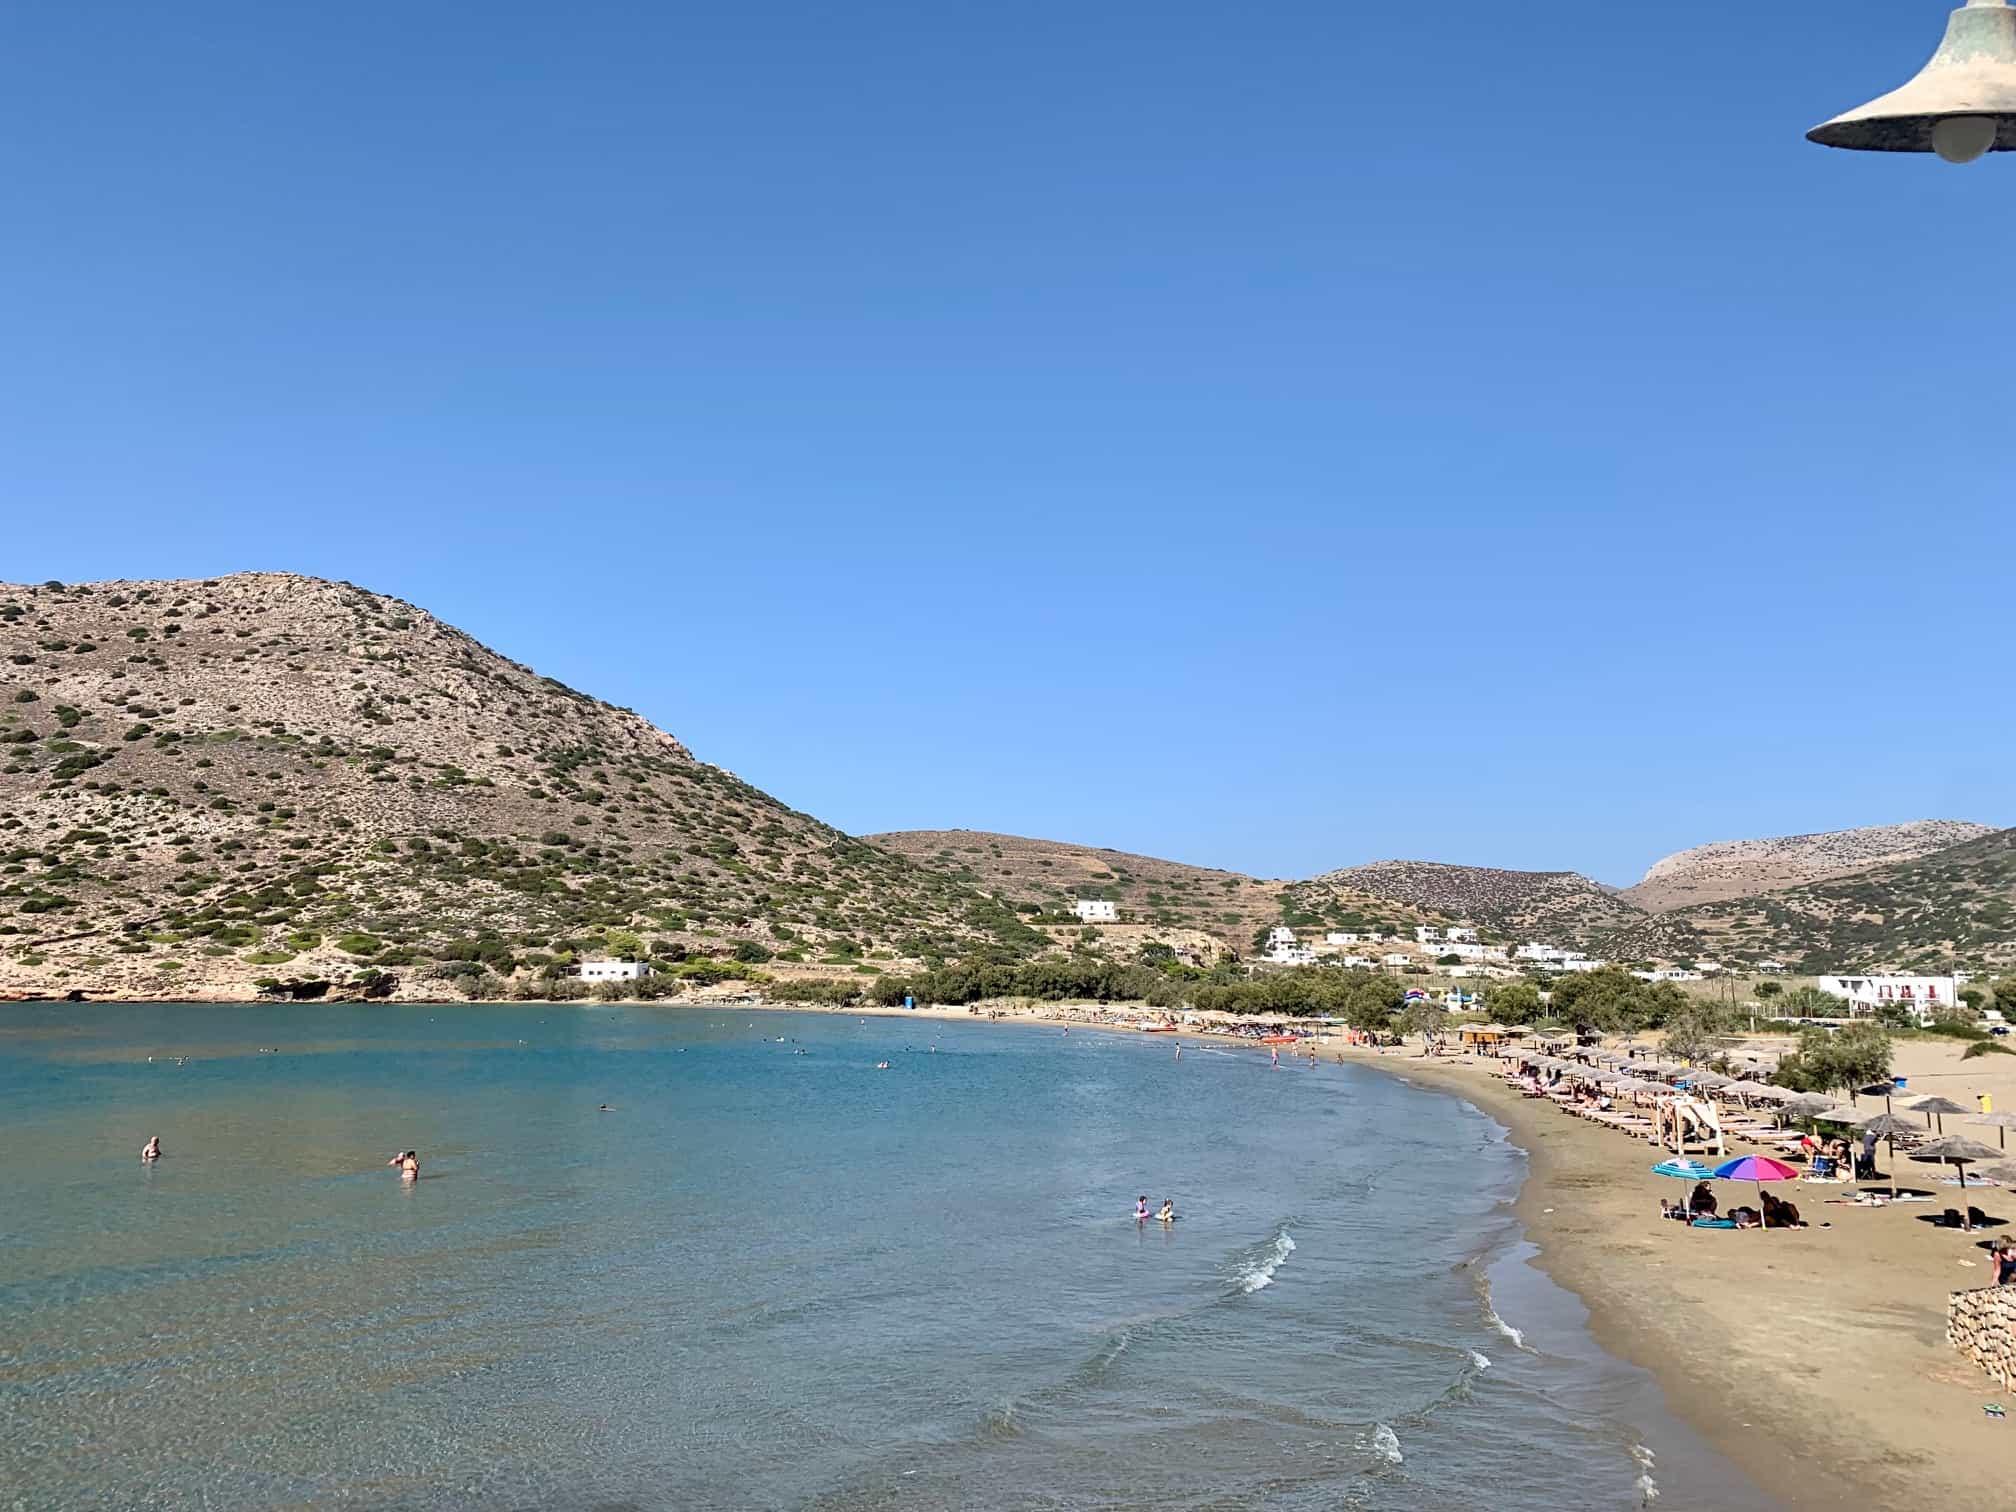 The view from Dolphin Bay Hotel, a family friendly Syros hotel overlooking Galissas Beach.